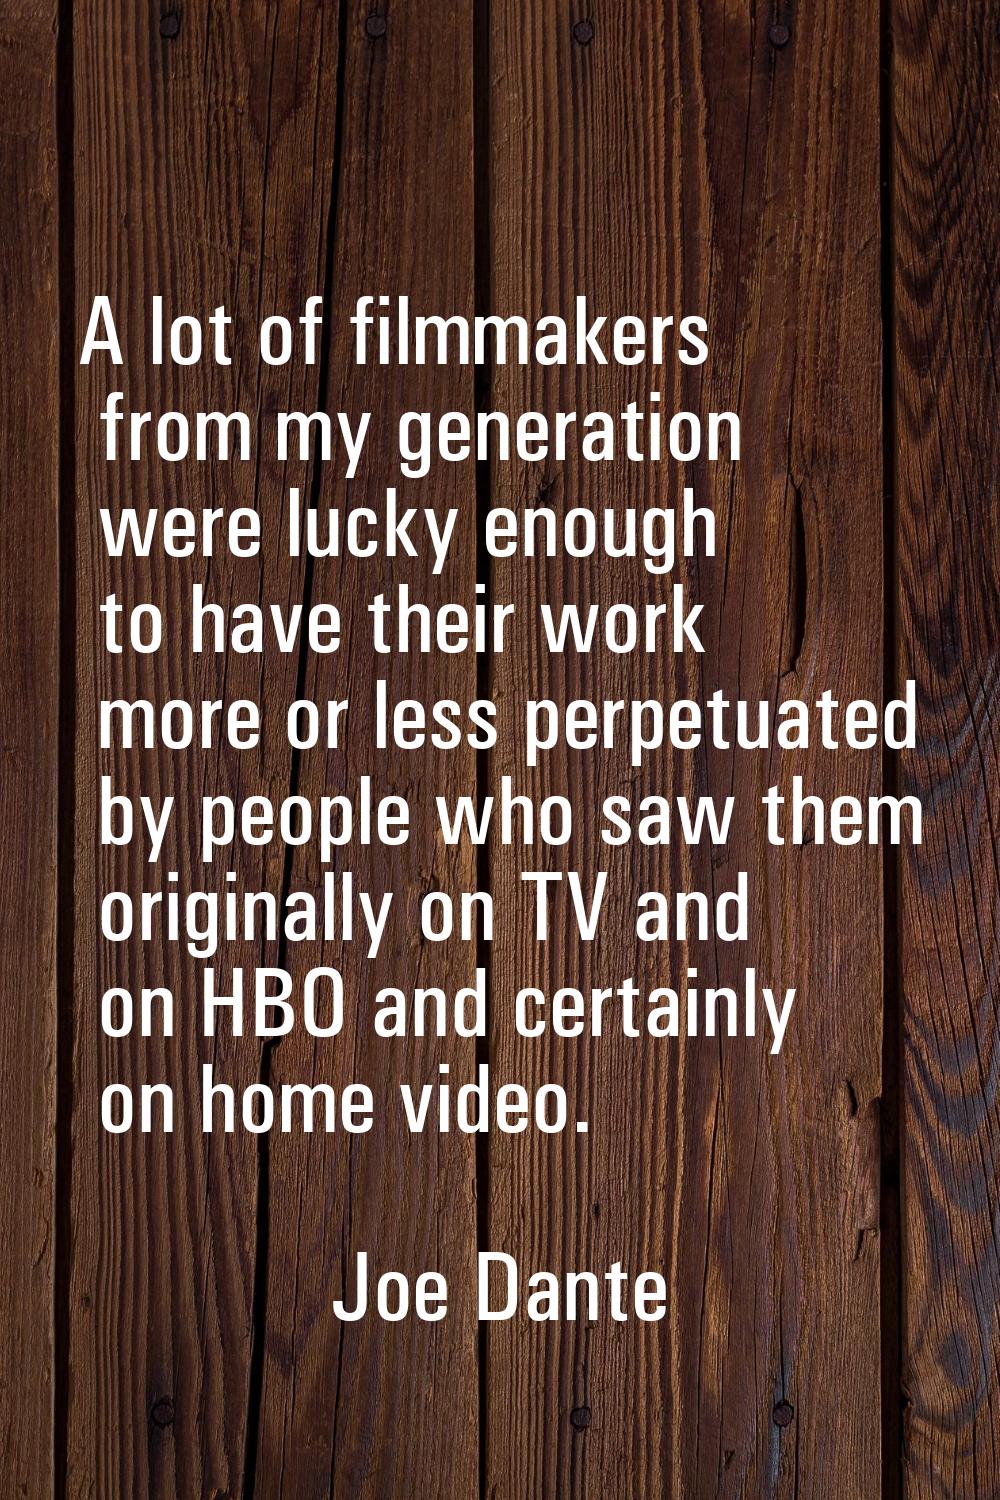 A lot of filmmakers from my generation were lucky enough to have their work more or less perpetuate